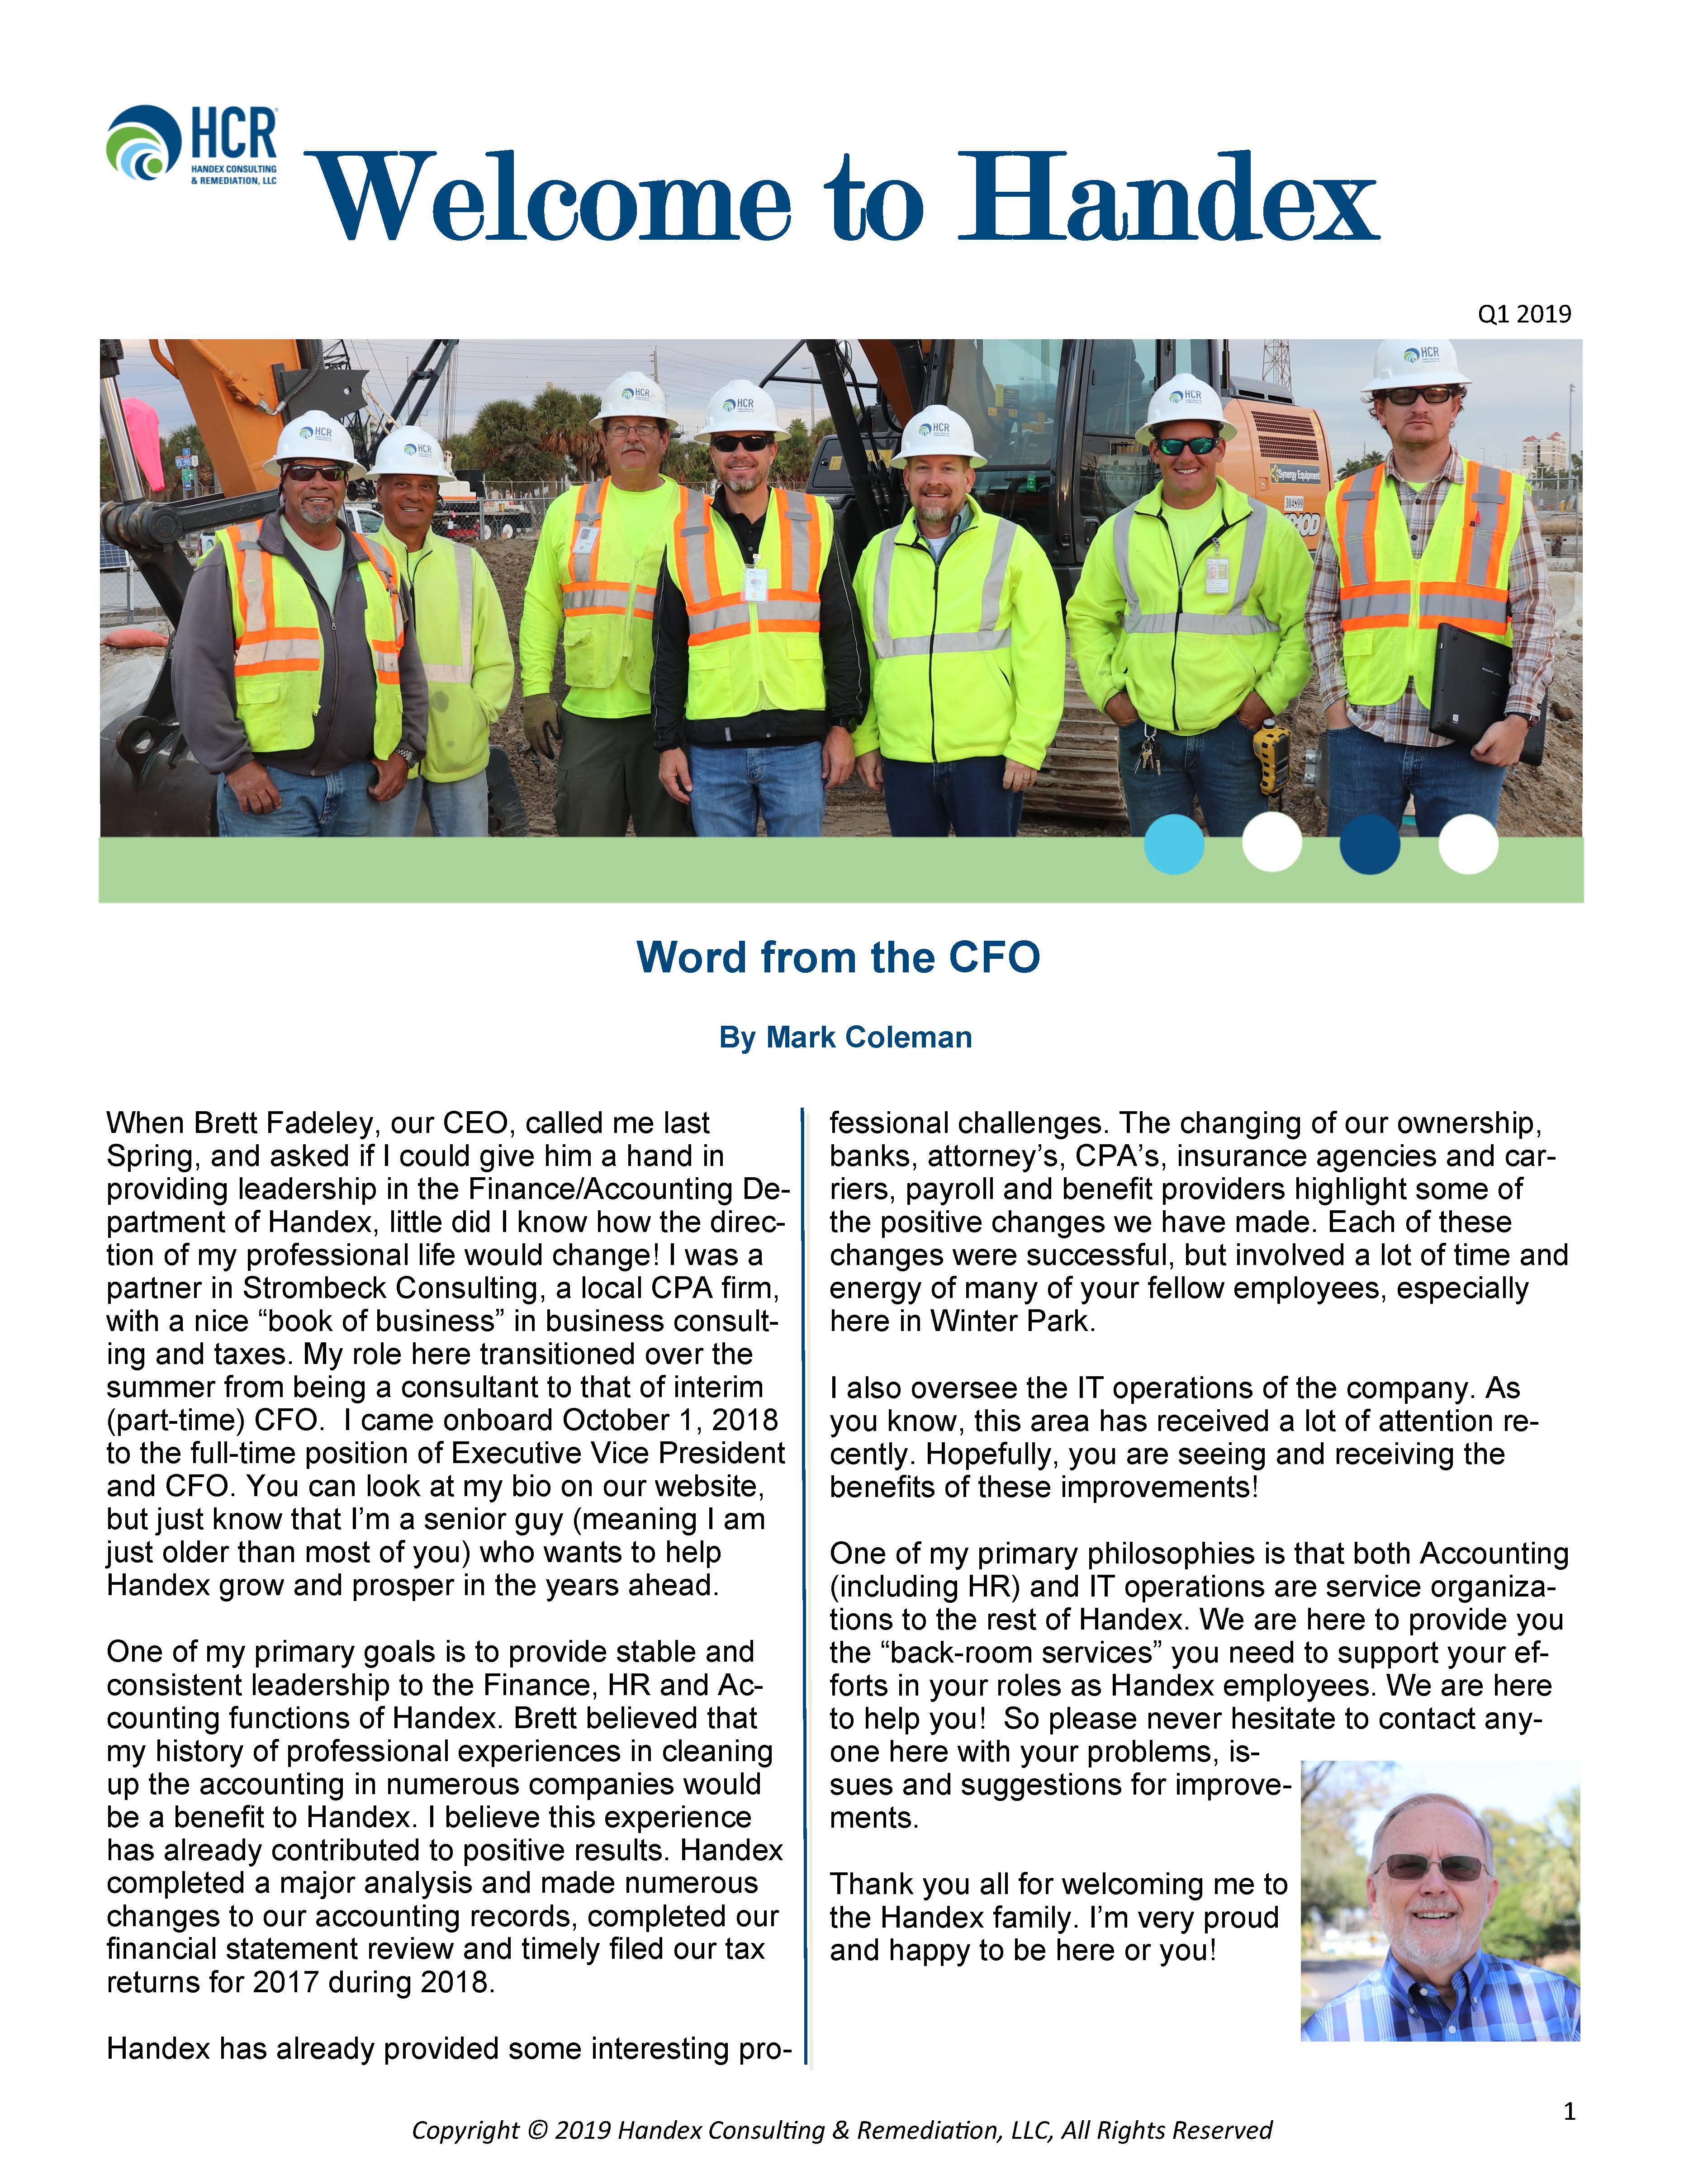 Welcome to Handex_Q1 2019 Newsletter_Page_1